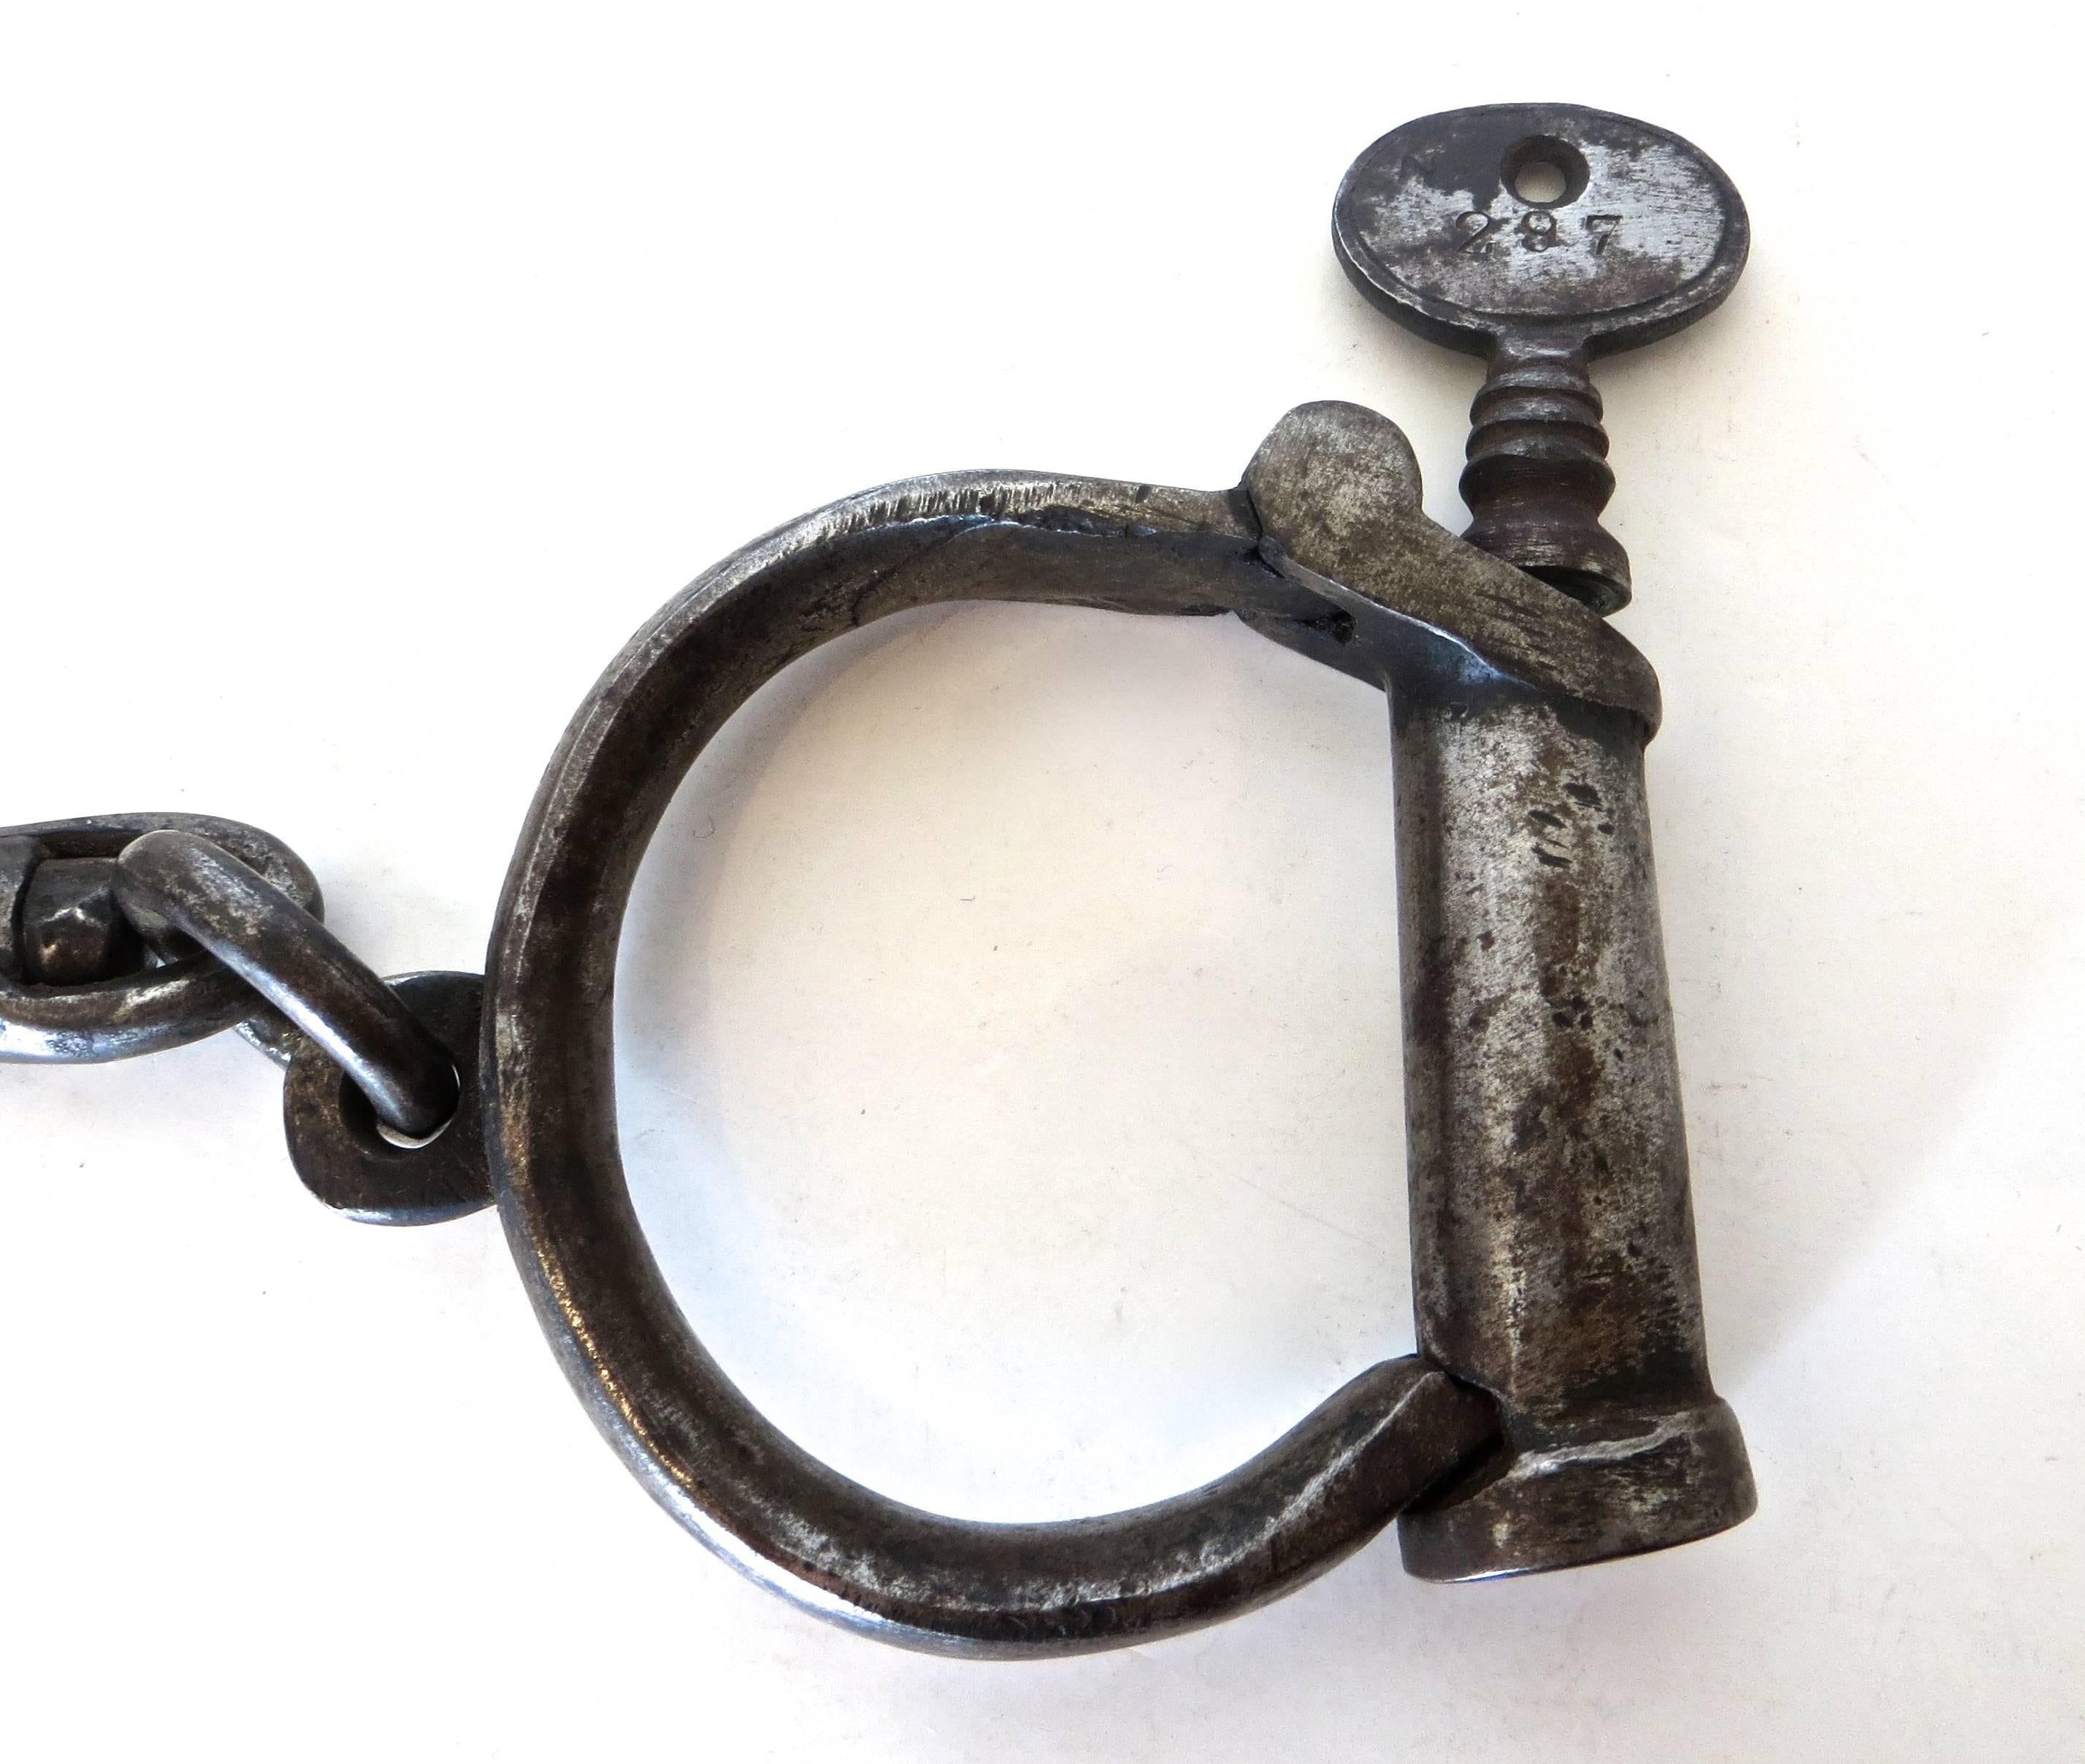 English Handcuffs by Hiatt, England 'Prop from Magician' Labeled#297, circa 1870